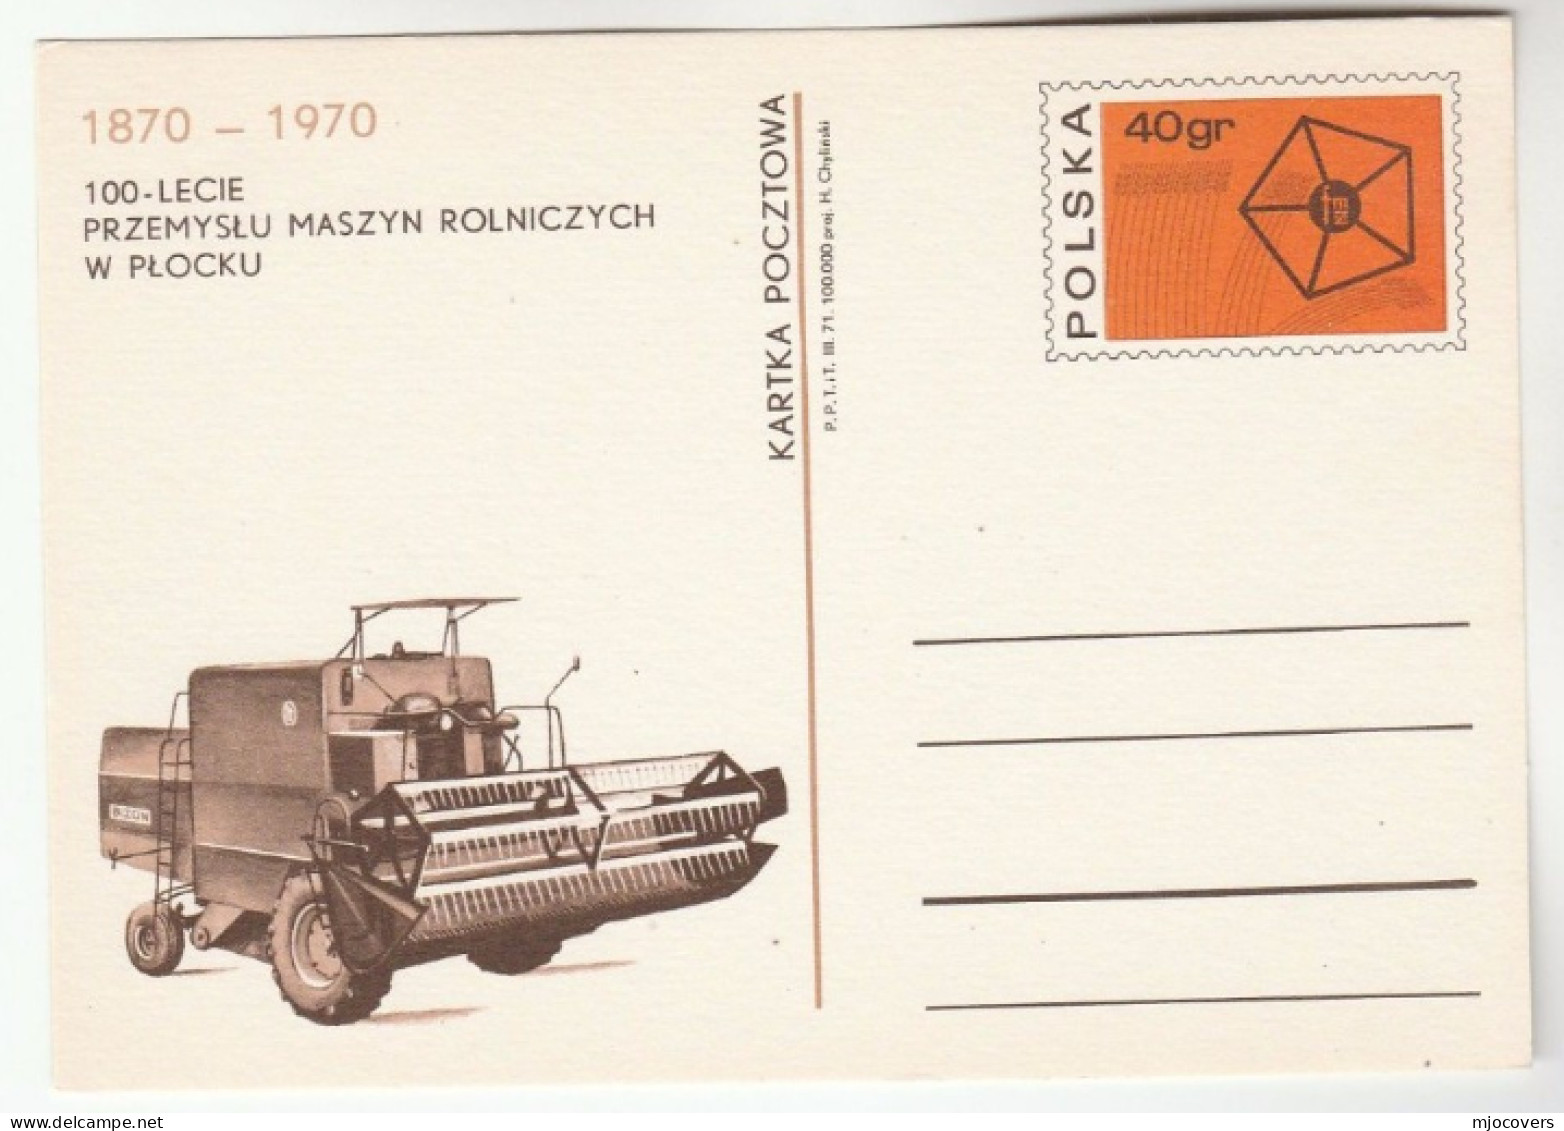 AGRICULTURAL MACHINERY Poland 1971 Illus POSTAL STATIONERY CARD Cover Stamps Farming Agriculture - Agriculture